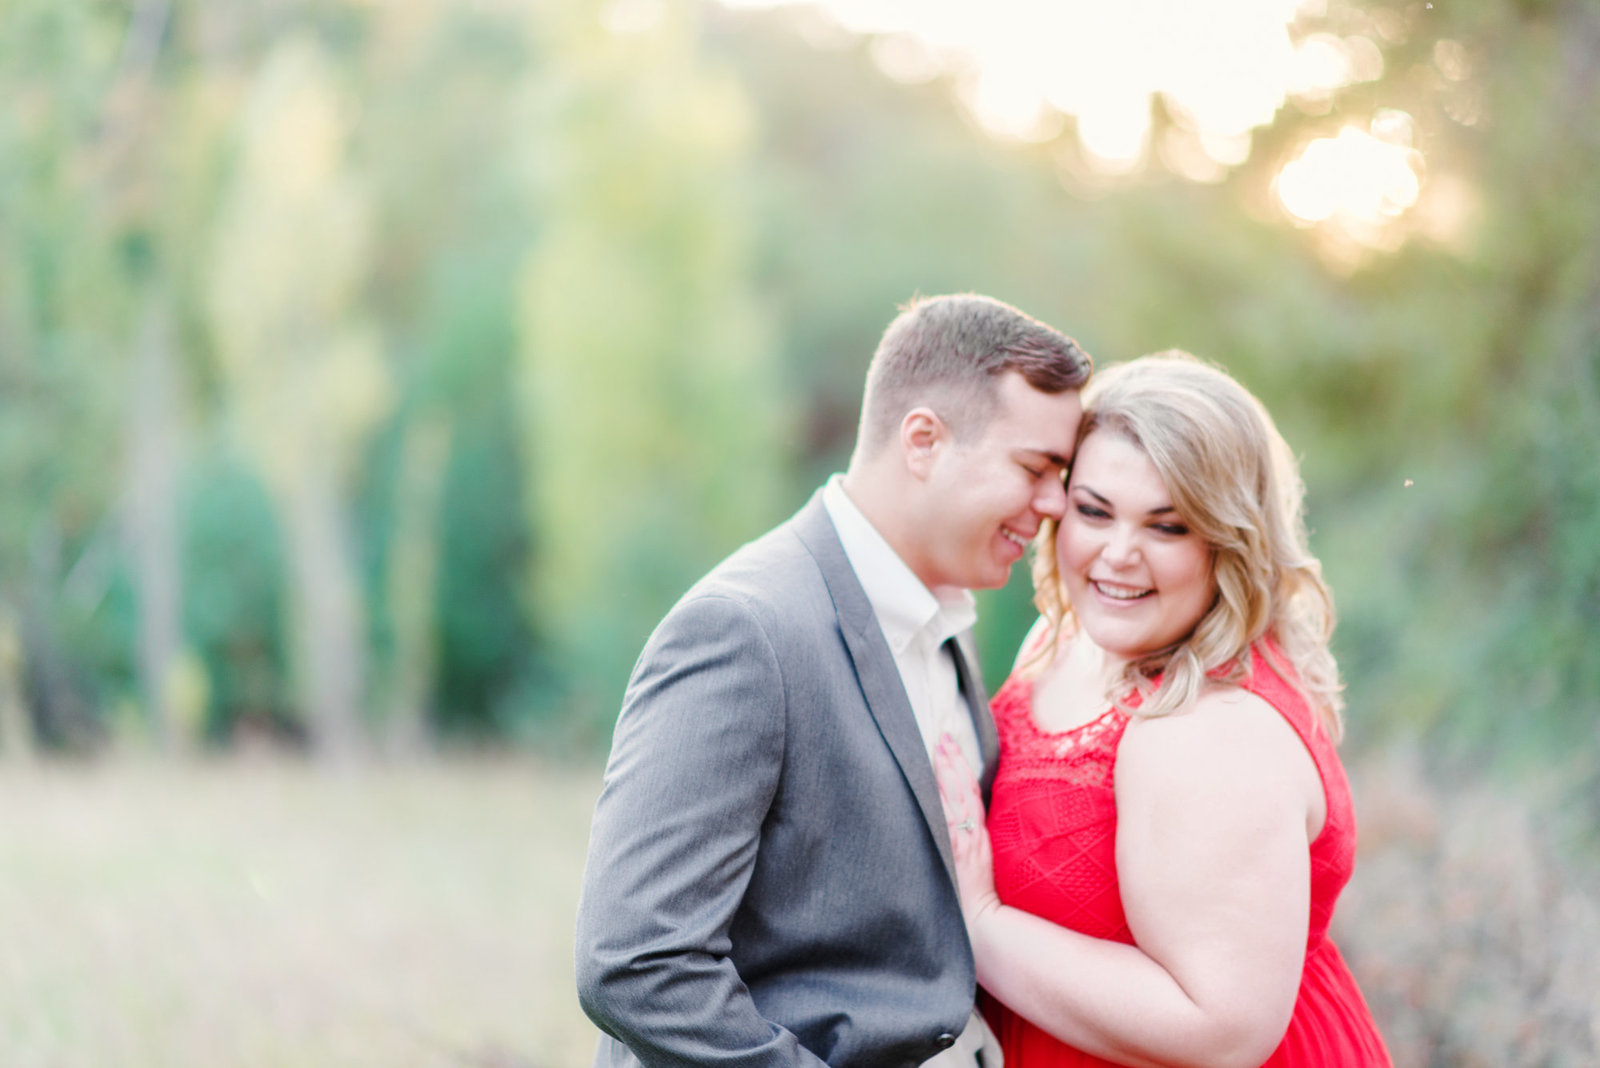 engagement photography tips for portrait session in traverse city michigan